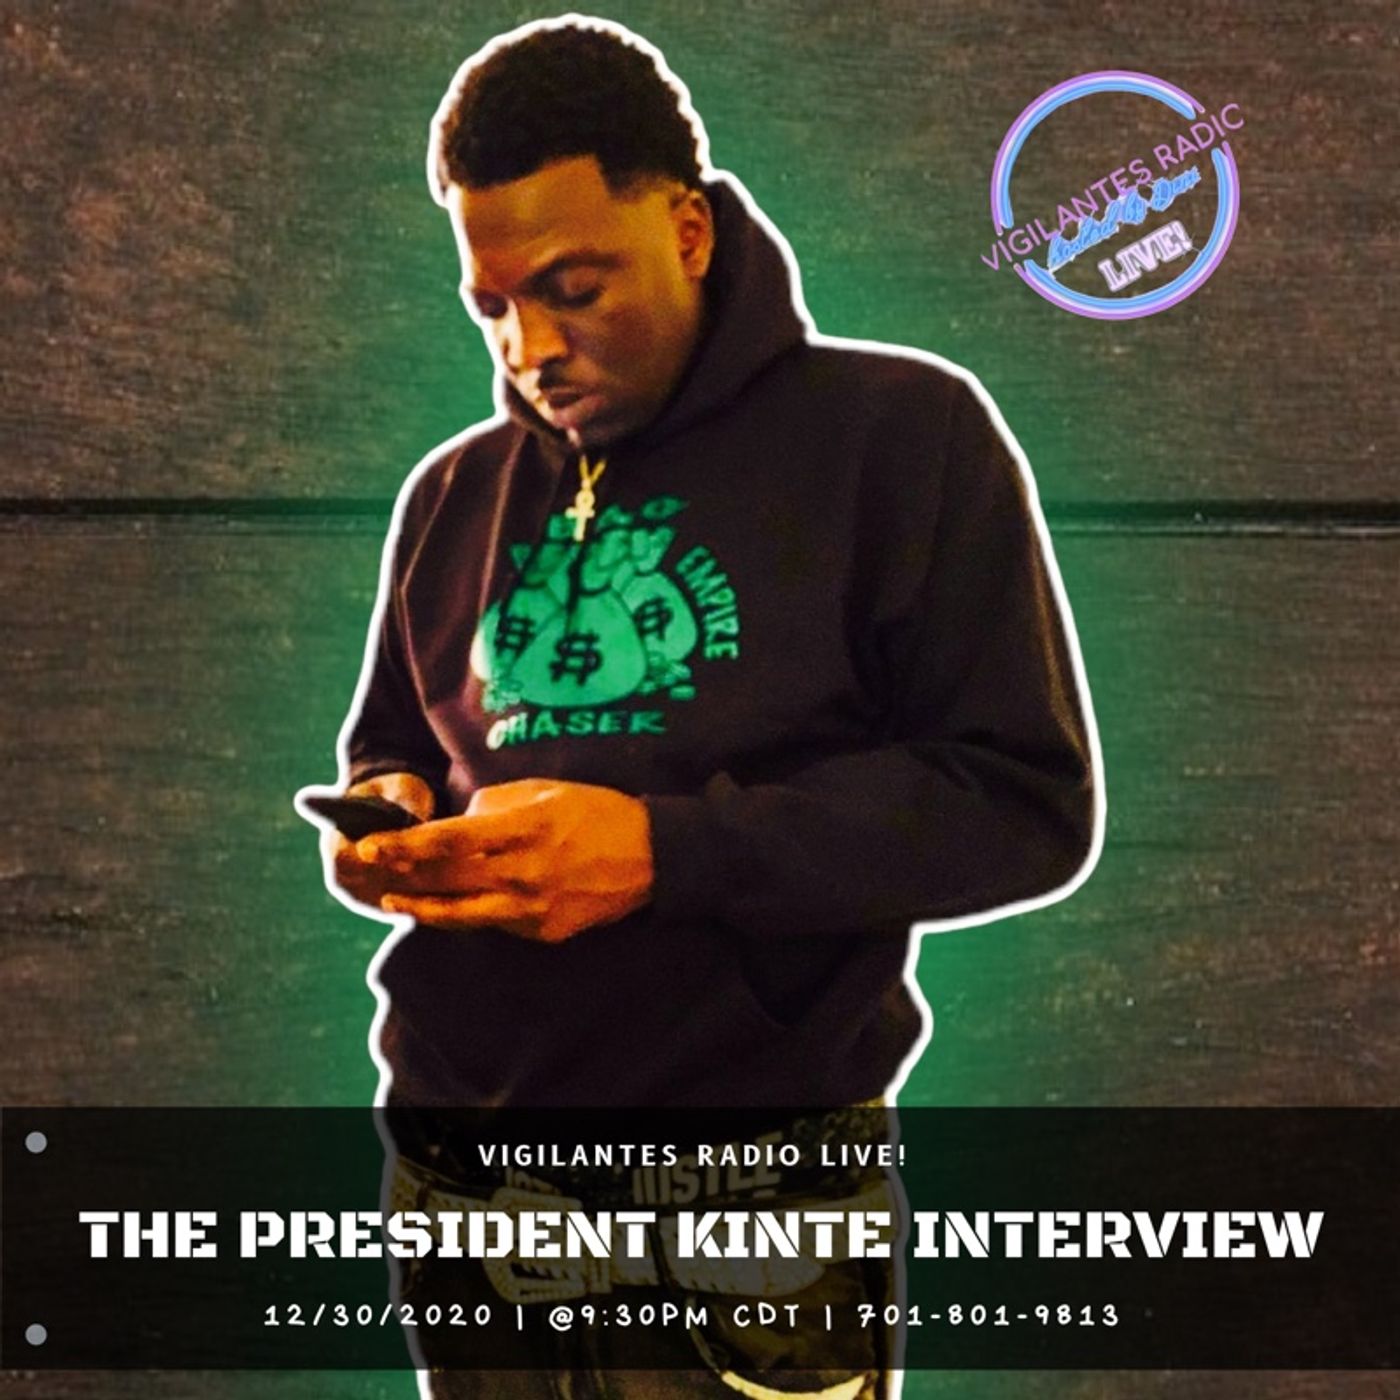 The President Kinte Interview. Image